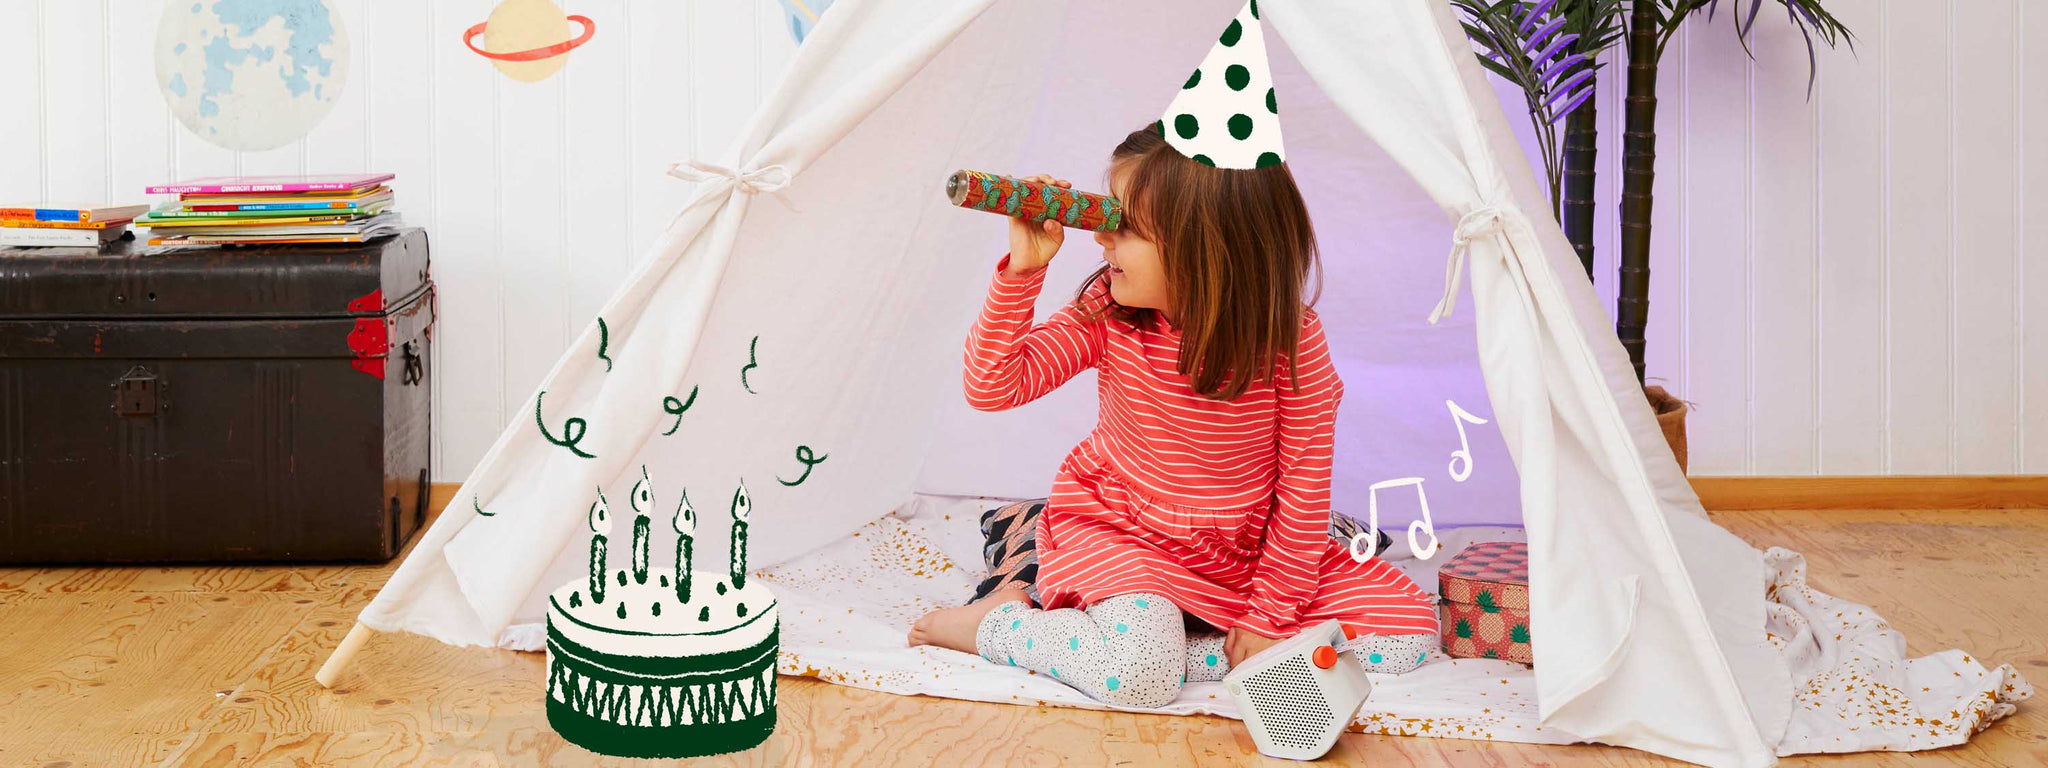 How to throw your child a birthday party at home